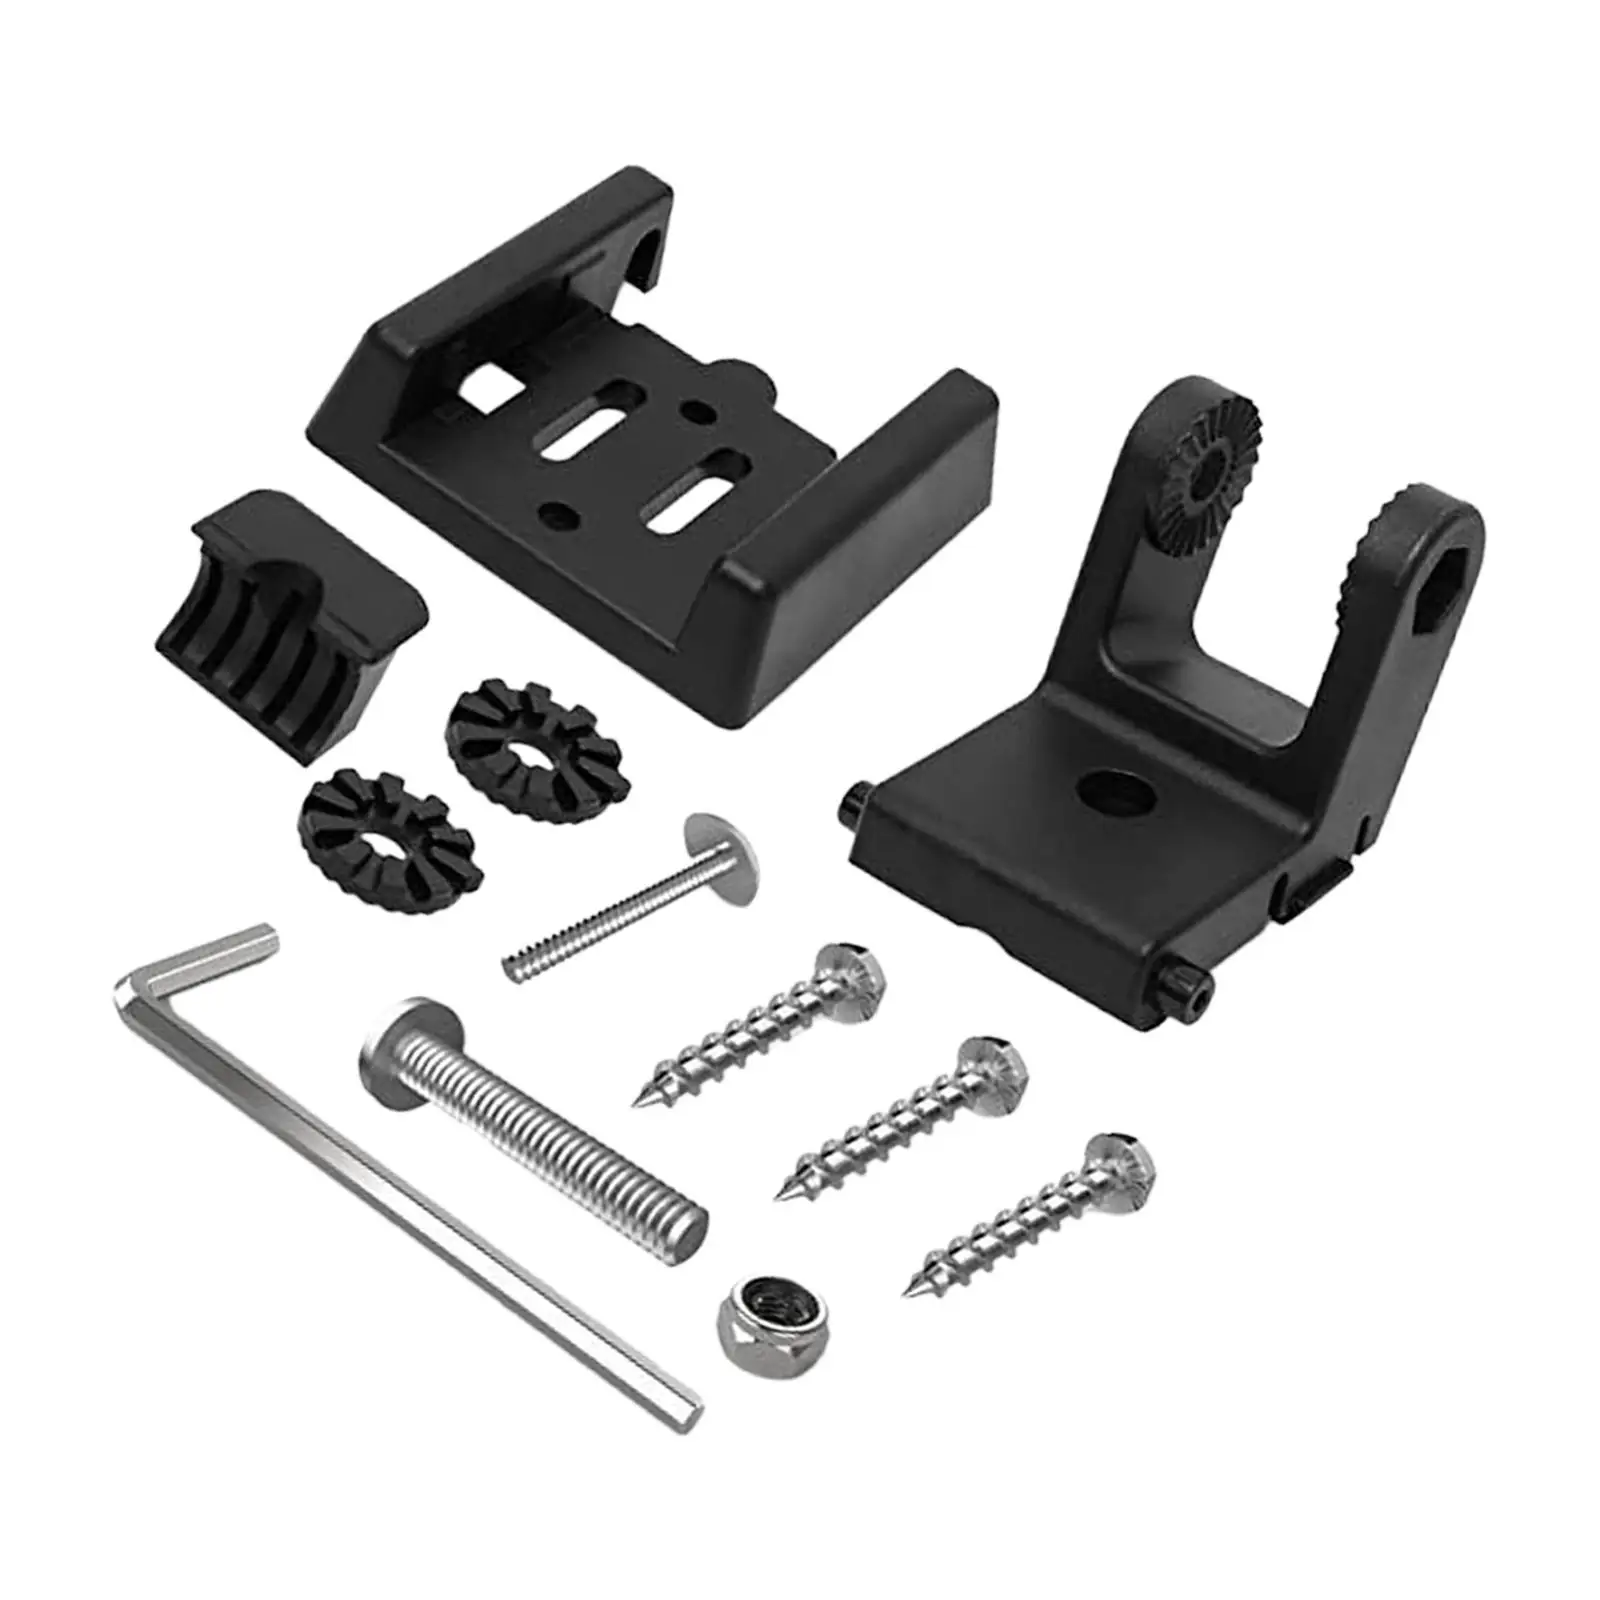 Transducer Bracket Replacement Transducer Mount Transom Mounting Hardware Set for XNT 920T 9HW T 1474T 1420T 928T 9HW